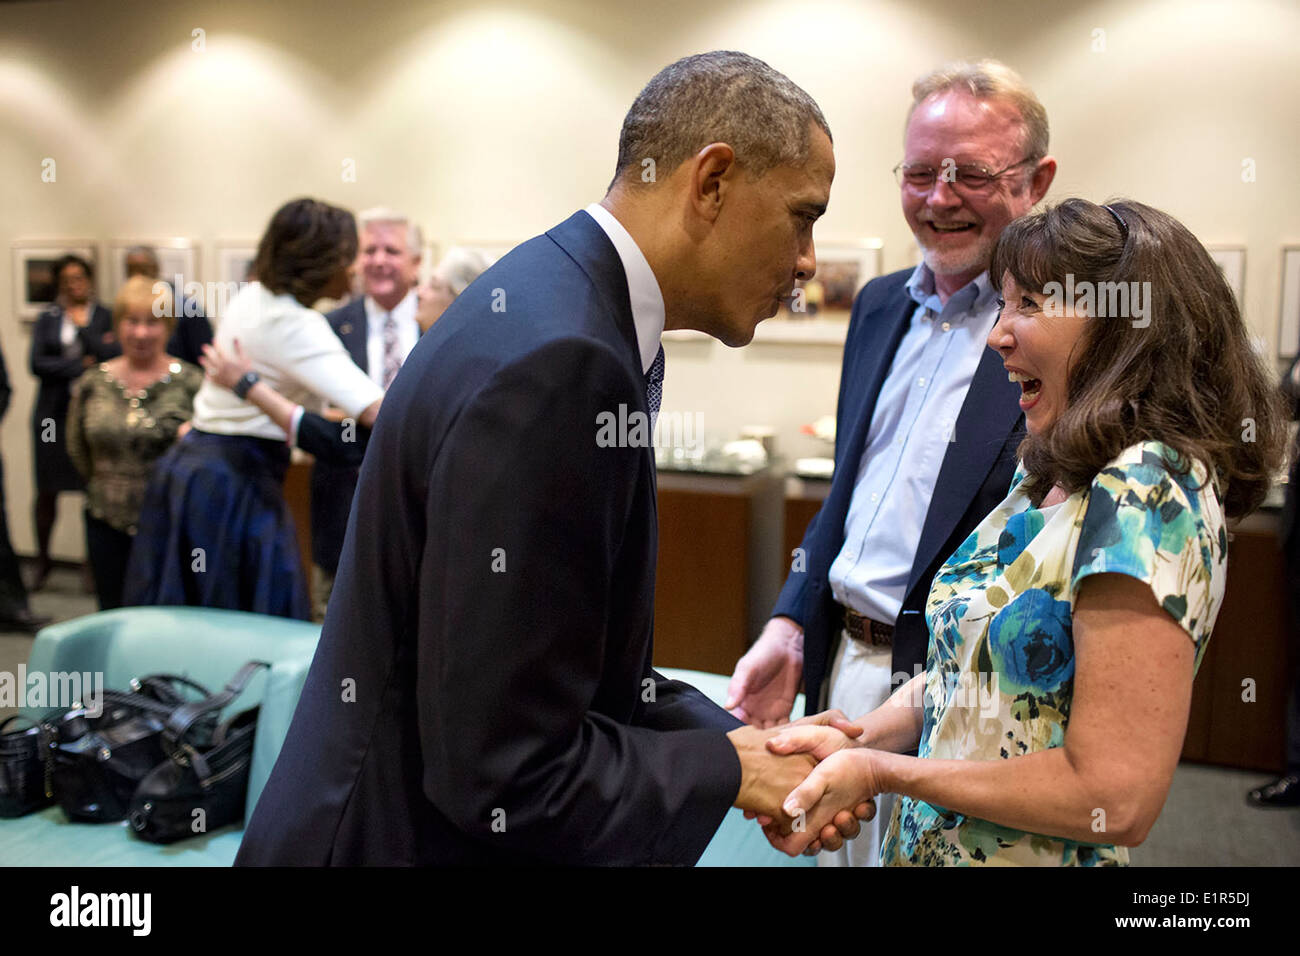 US President Barack Obama greets Linda and Russ Dickson, a Texas couple who wrote a letter to the President about the Affordable Care Act at the Lyndon Baines Johnson Presidential Library April 10, 2014 in Austin, Texas. Stock Photo